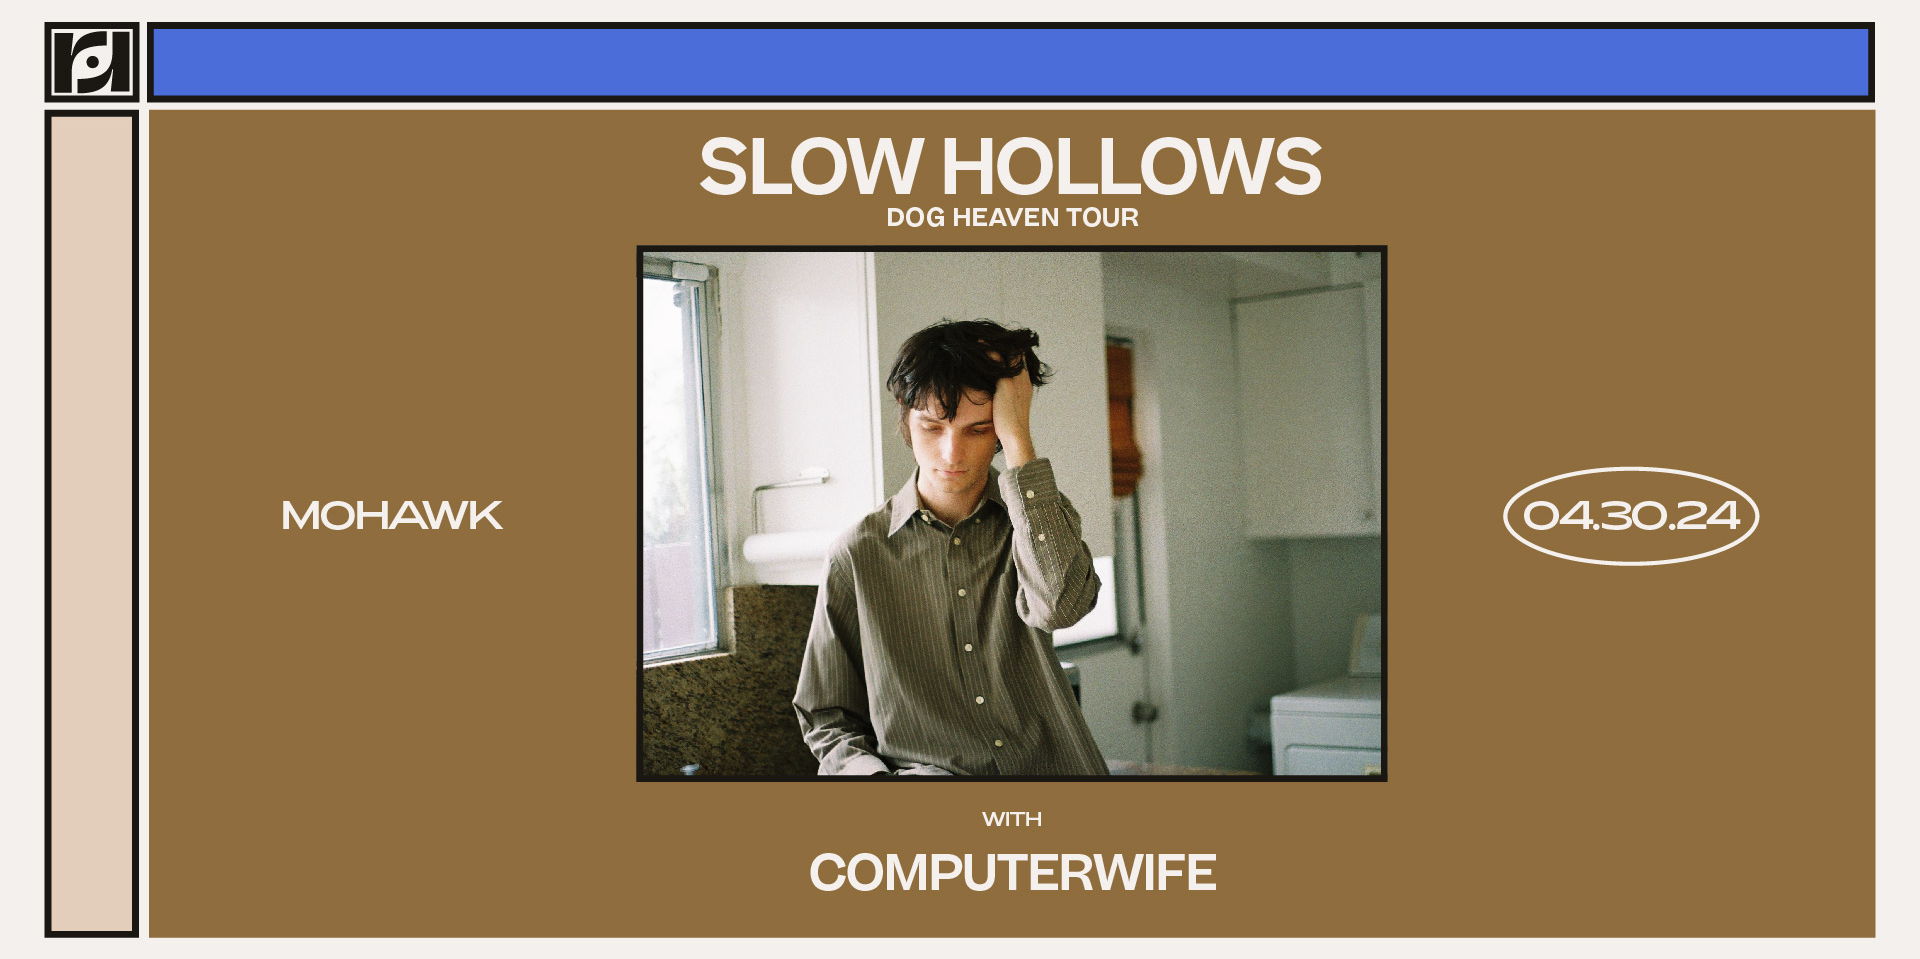 Resound Presents: Slow Hollows - Dog Heaven Tour w/ Computerwife at Mohawk promotional image